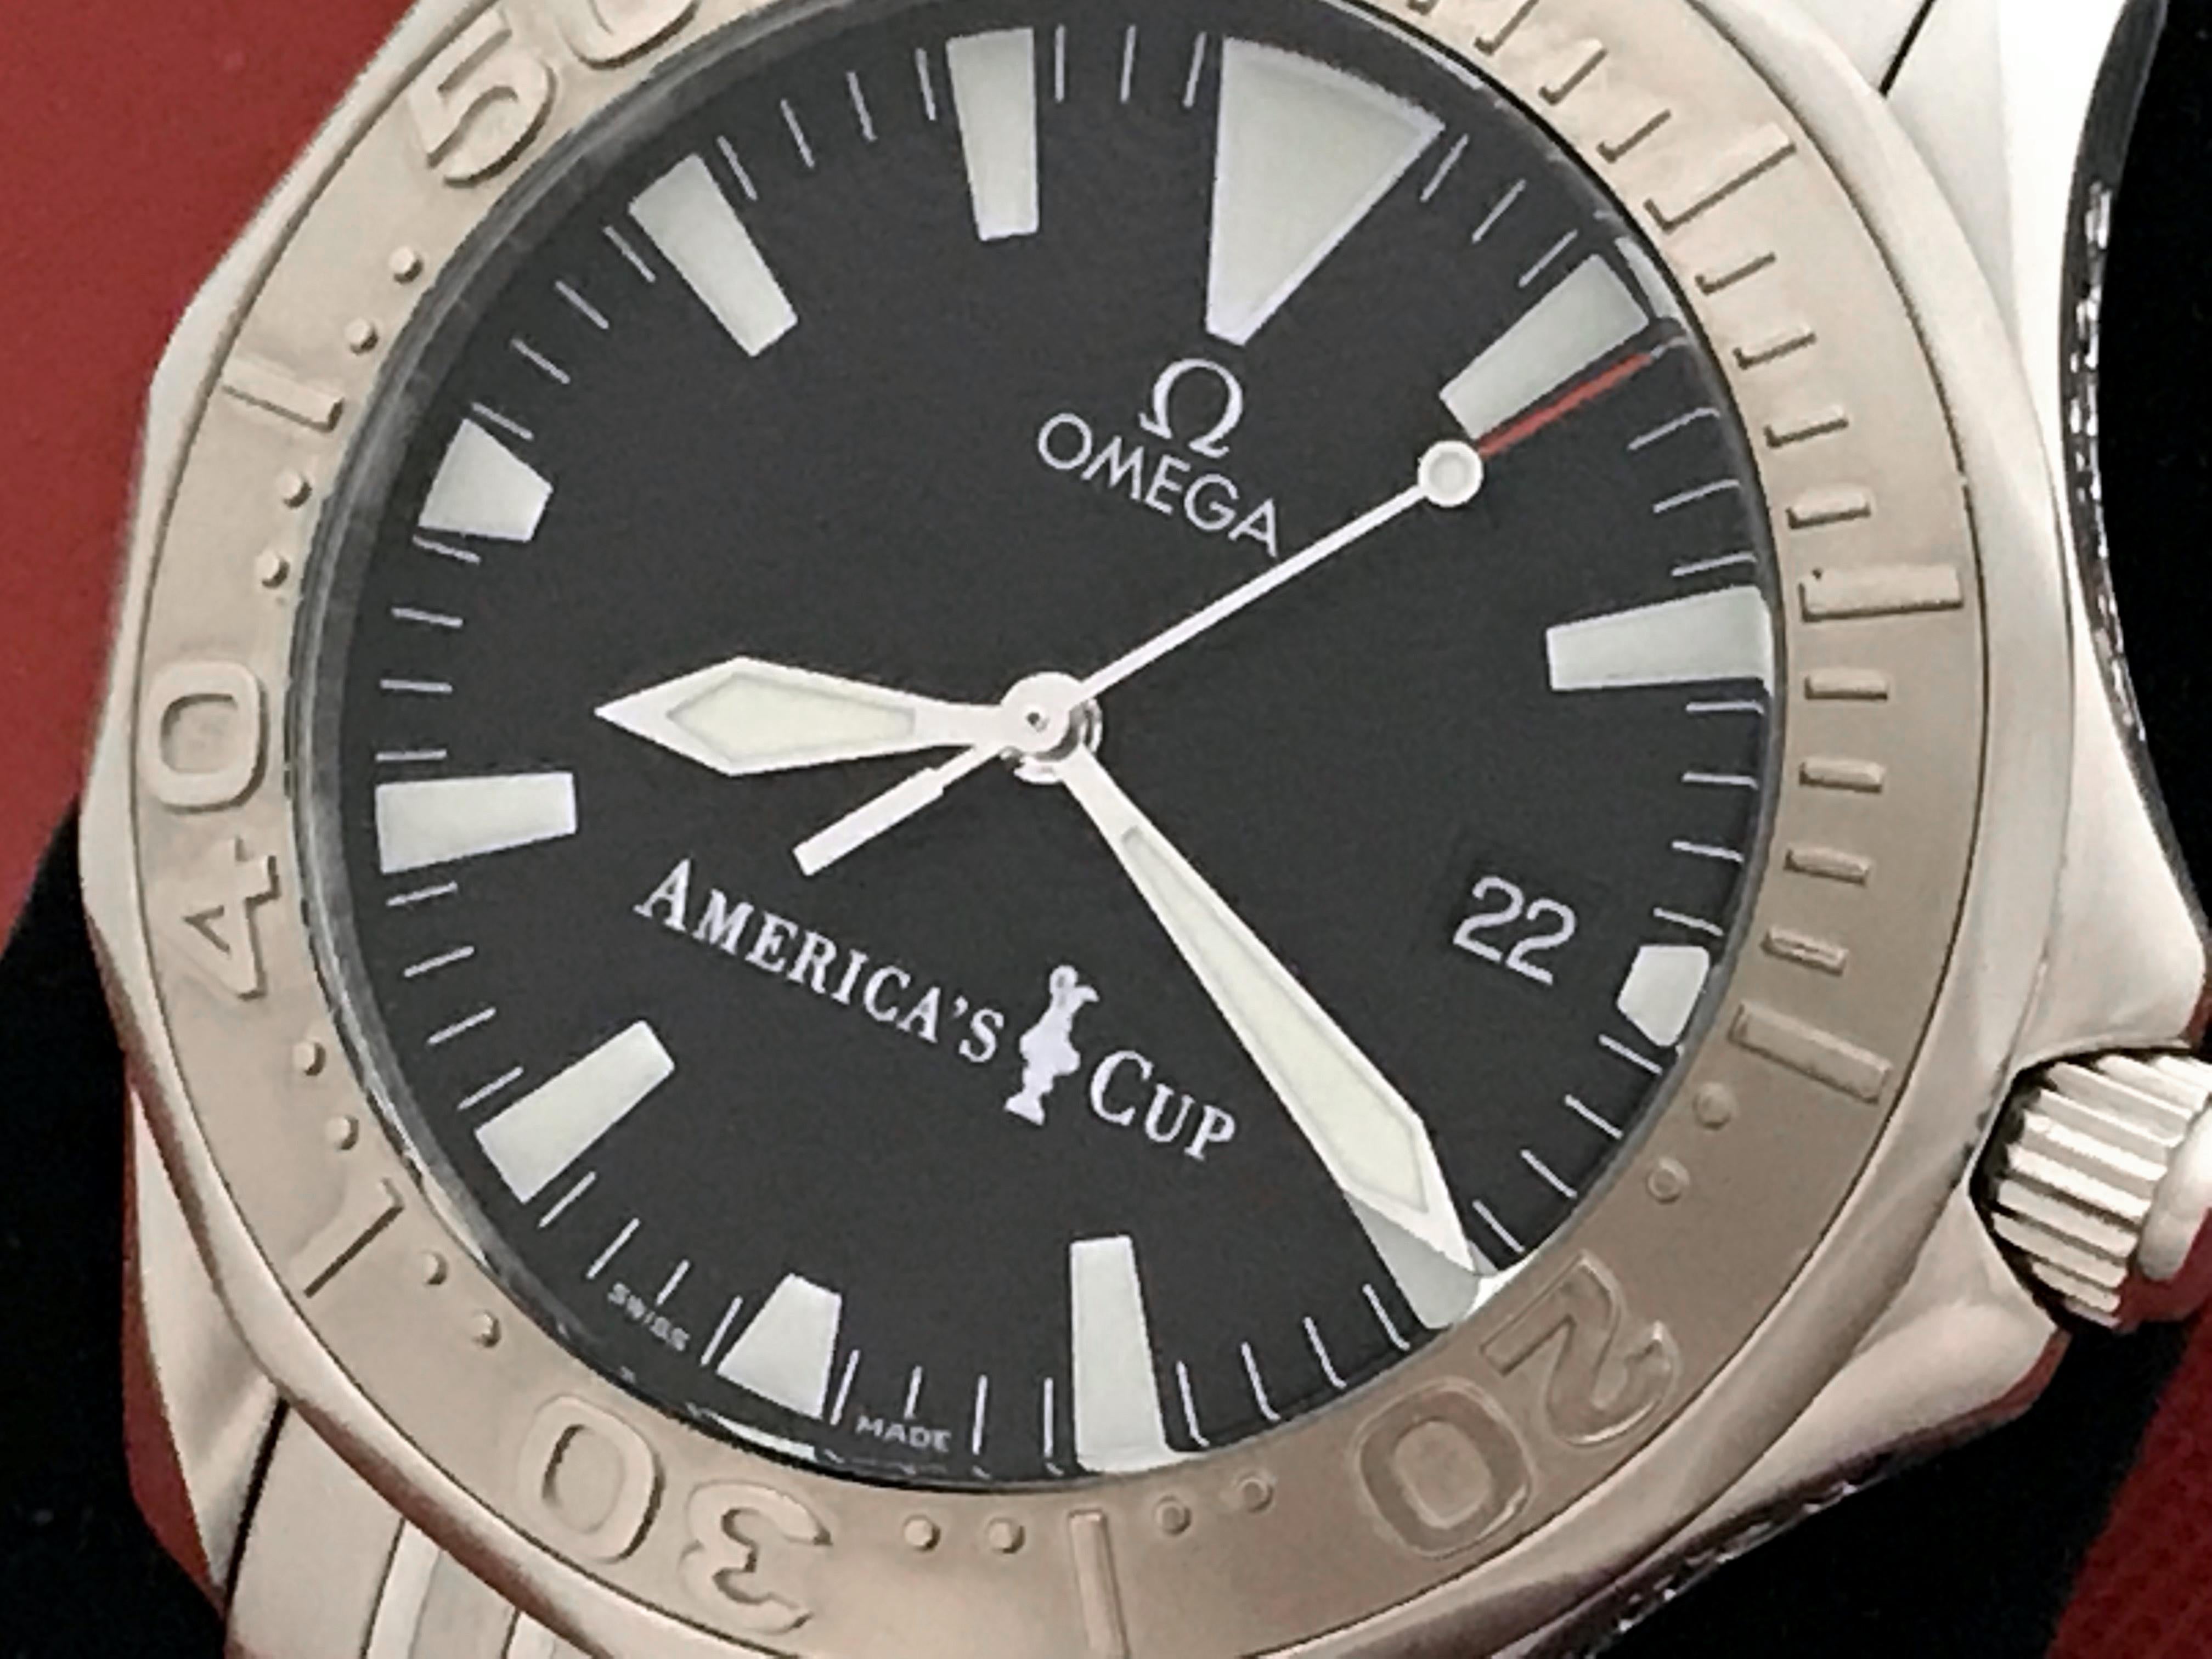 As New Omega Mens Seamaster Limited Edition America's Cup, Model 2533.50.00.  Stainless Steel round style case with rotating bezel and helium release valve. (40mm dia.). Stainless Steel Omega Seamaster bracelet with deployant clasp.  Black wave Dial